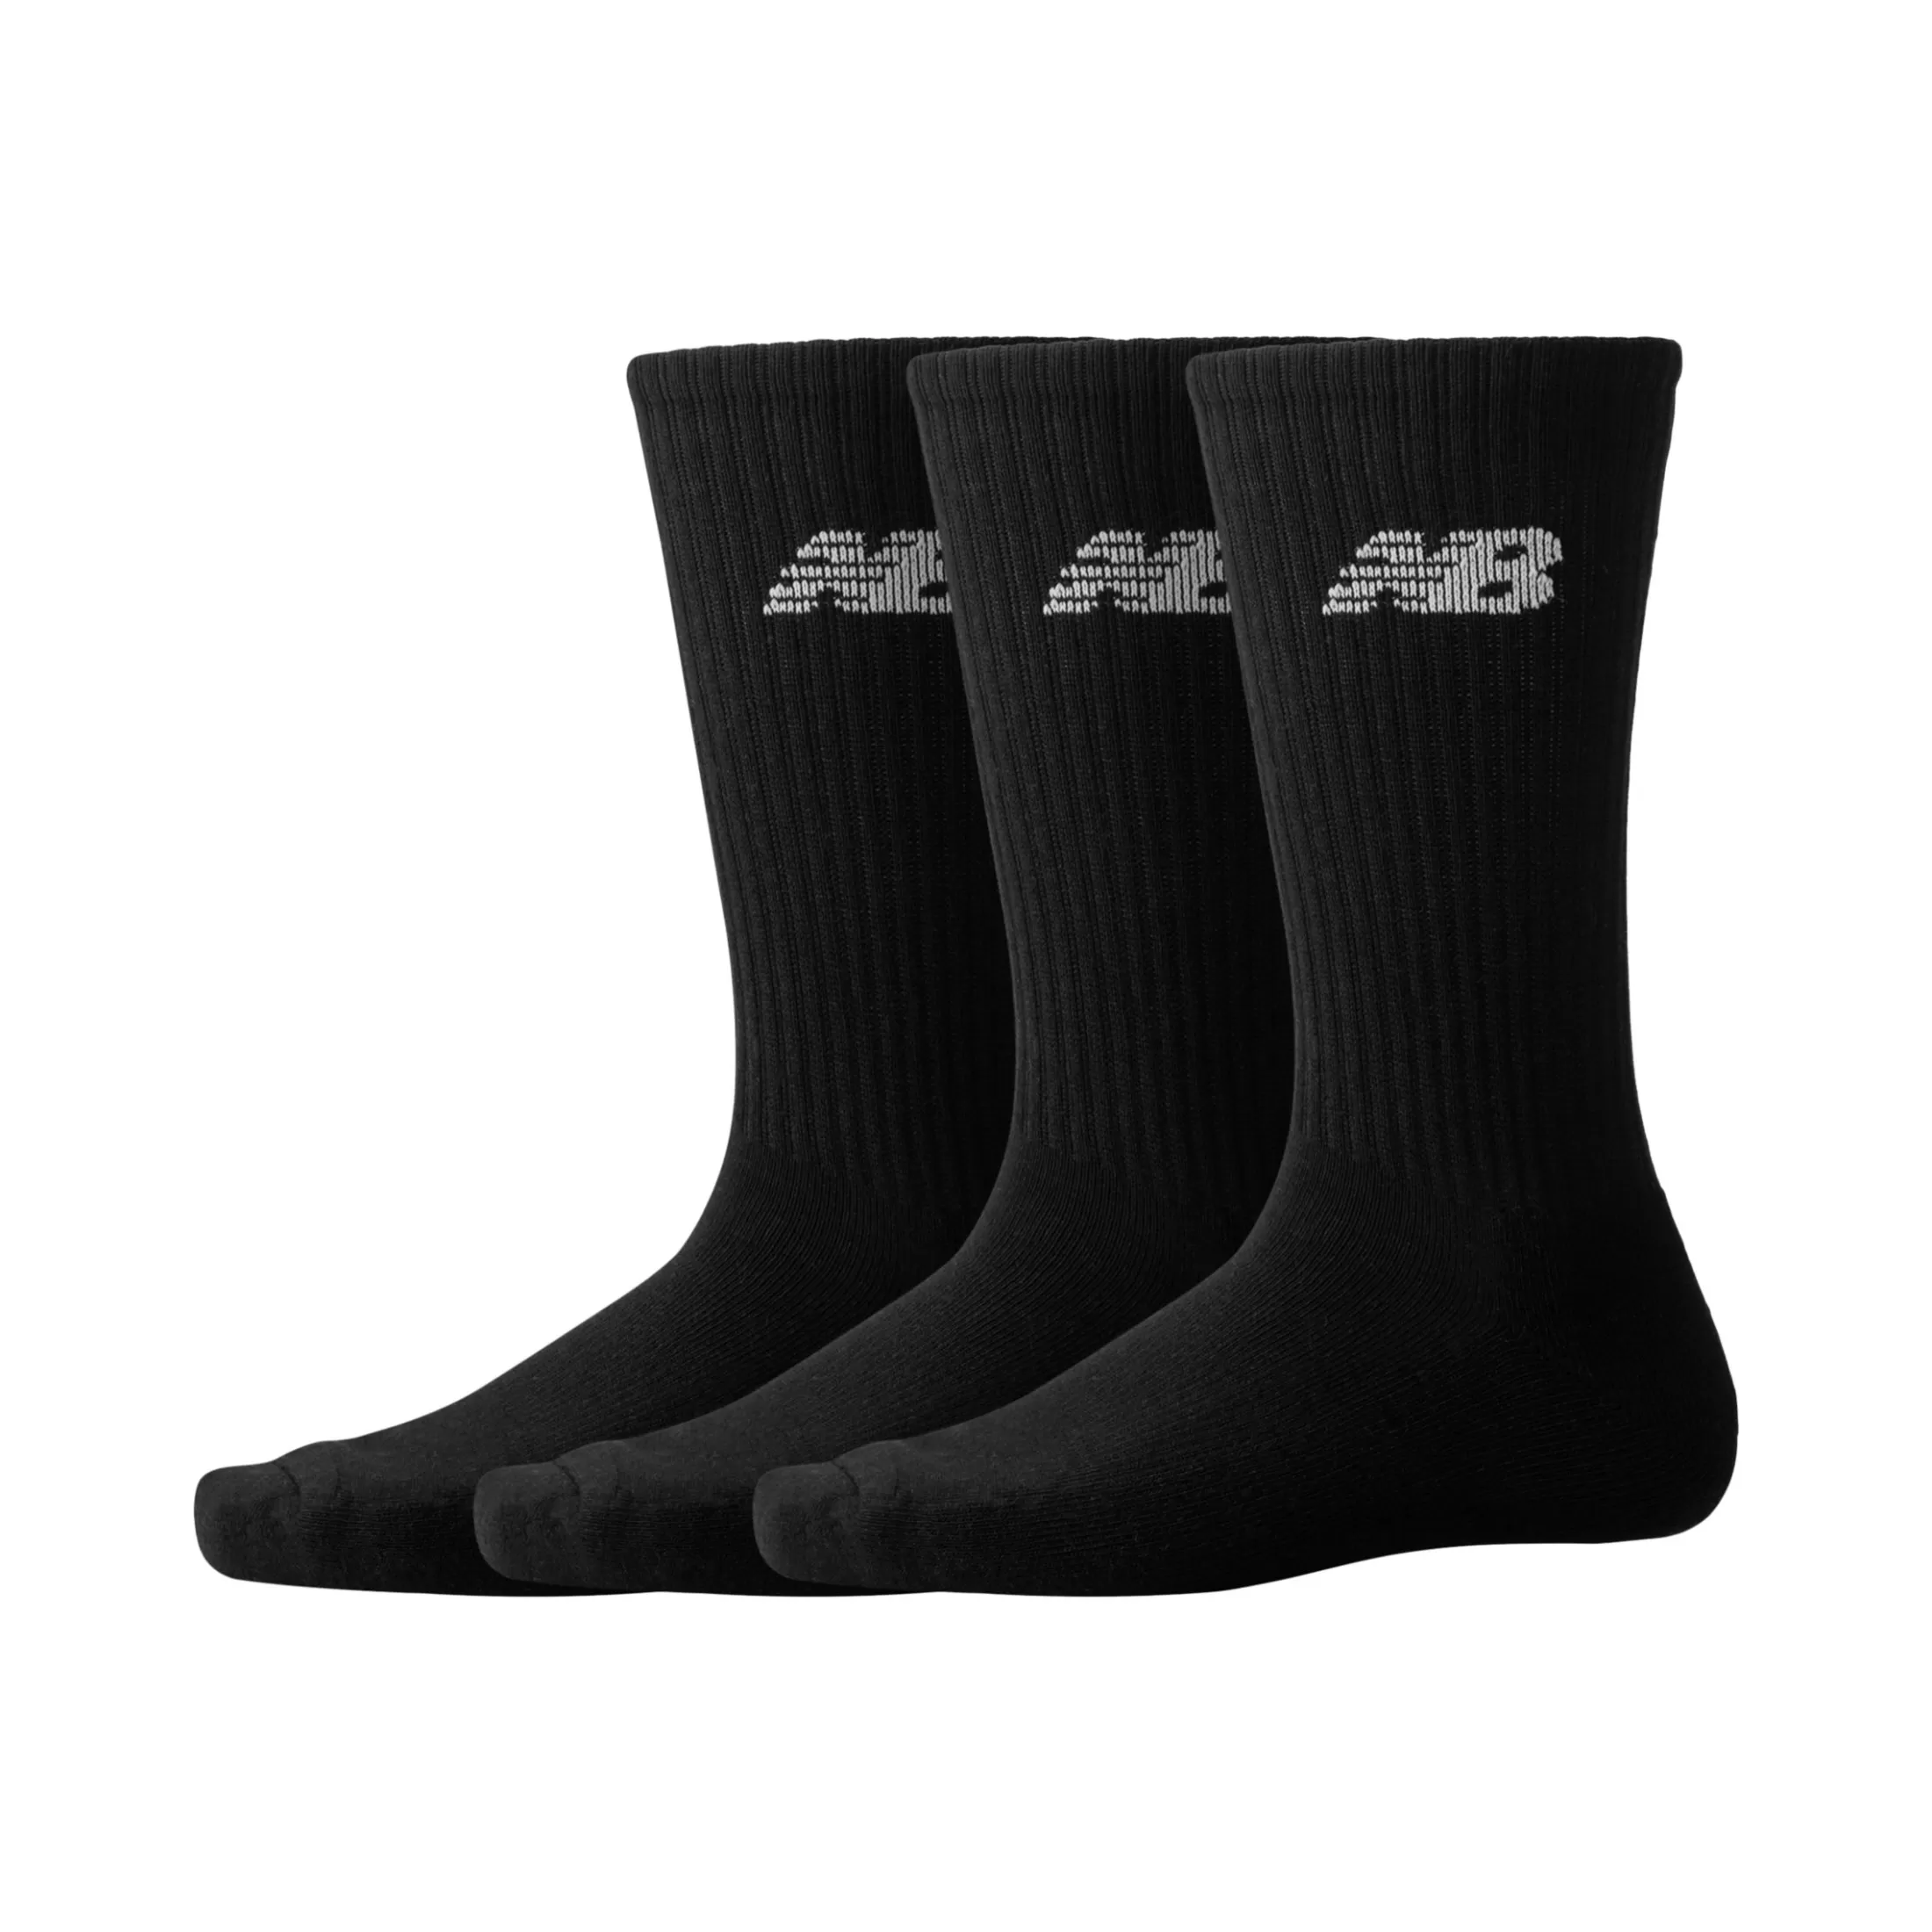 Clearance Unisex Everyday Crew 3 Pairs MULHER/HOMEN Socks | All Accessories